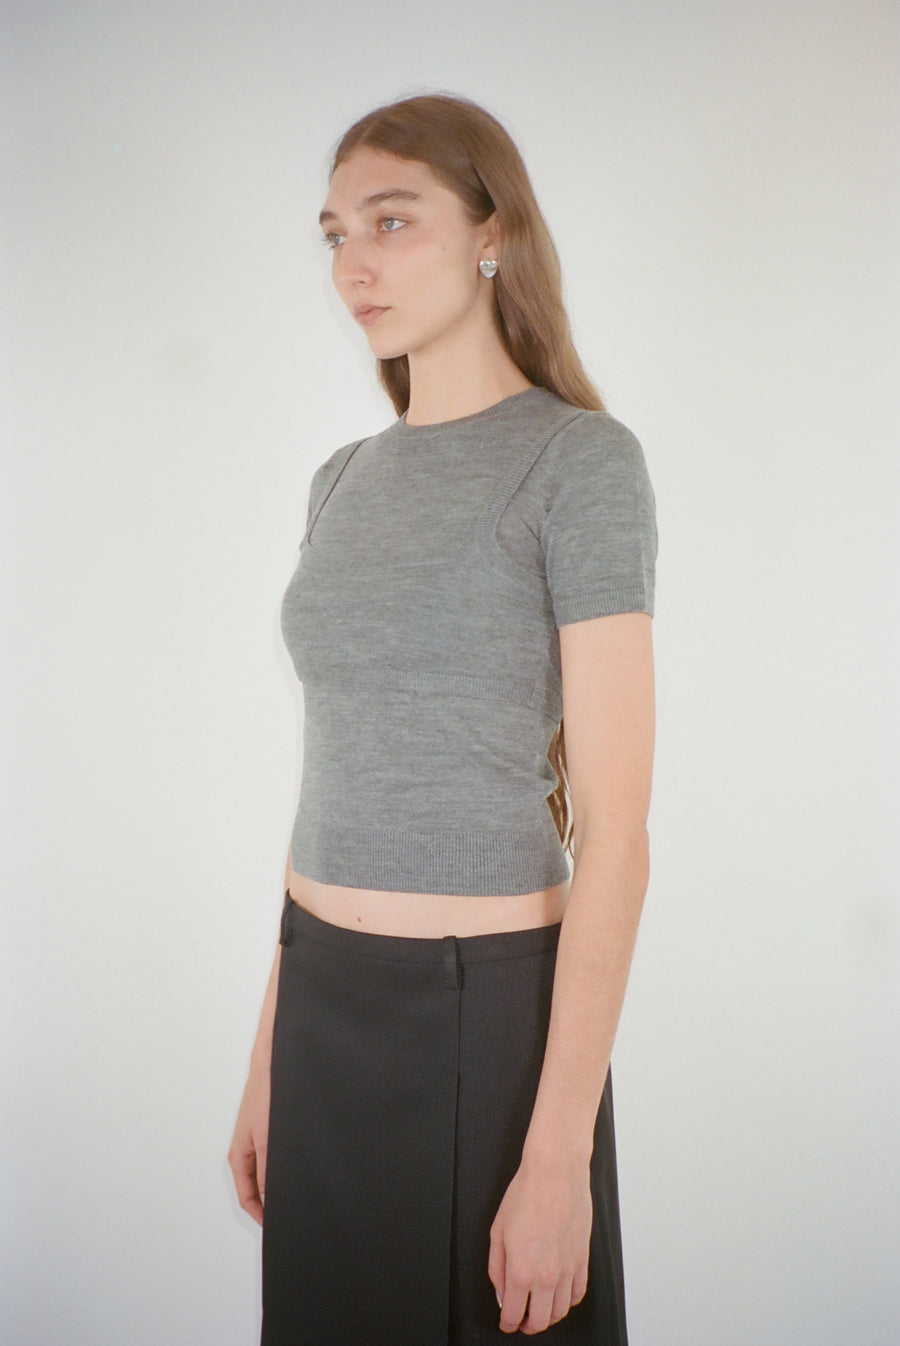 Short sleeve sweater in grey with built in layered bra on model